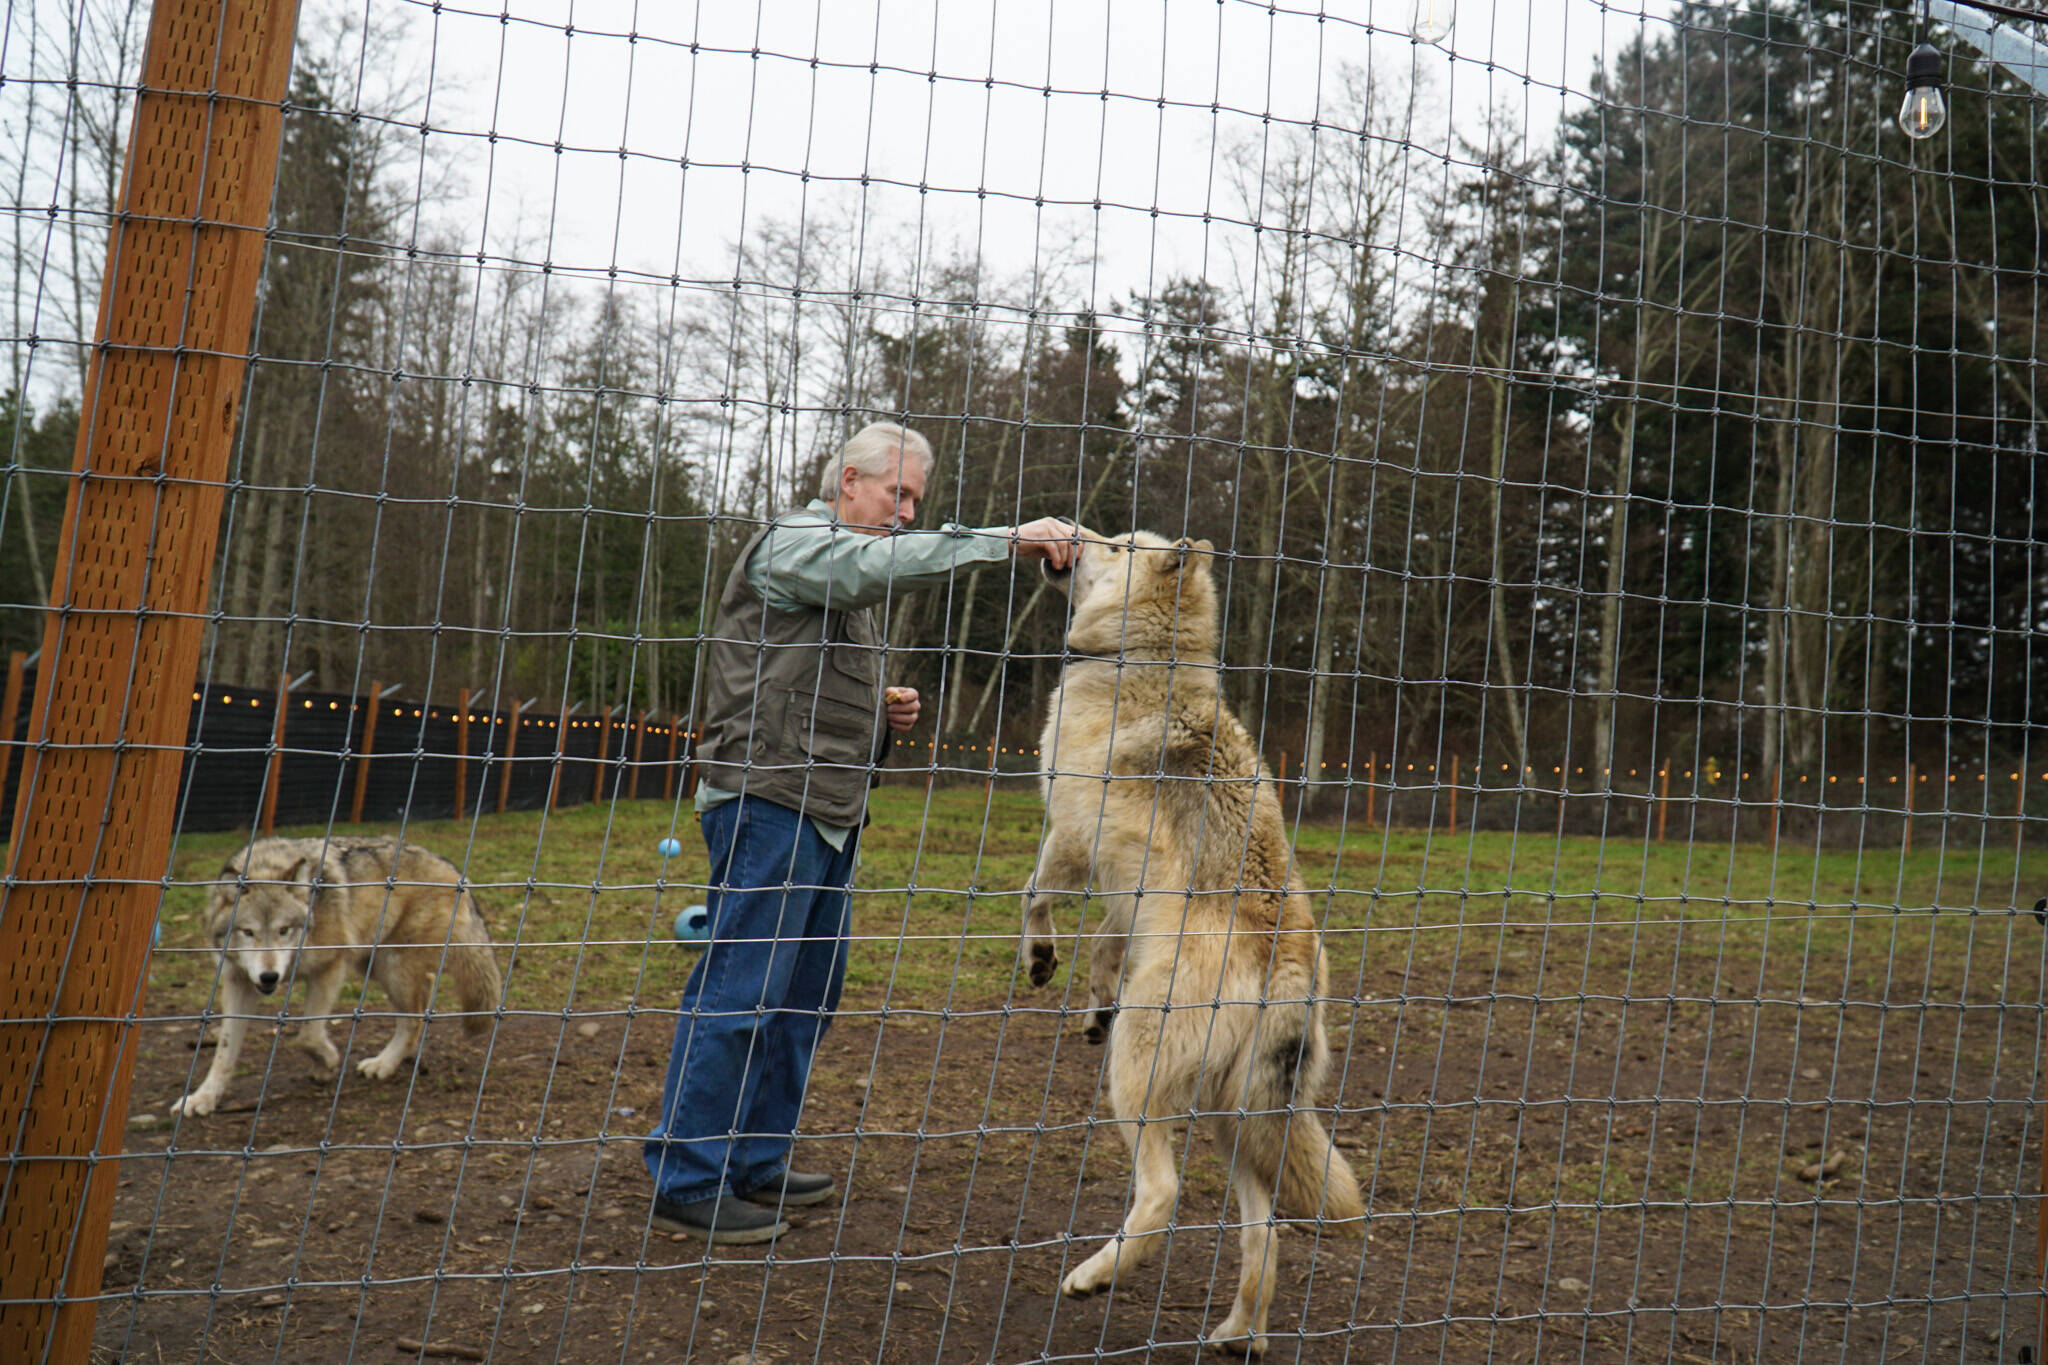 Owner Dave Coleburn gives treats to his wolves, Tahoe and Sierra, at Northwest Wildlife Sanctuary. (Photo by Sam Fletcher)